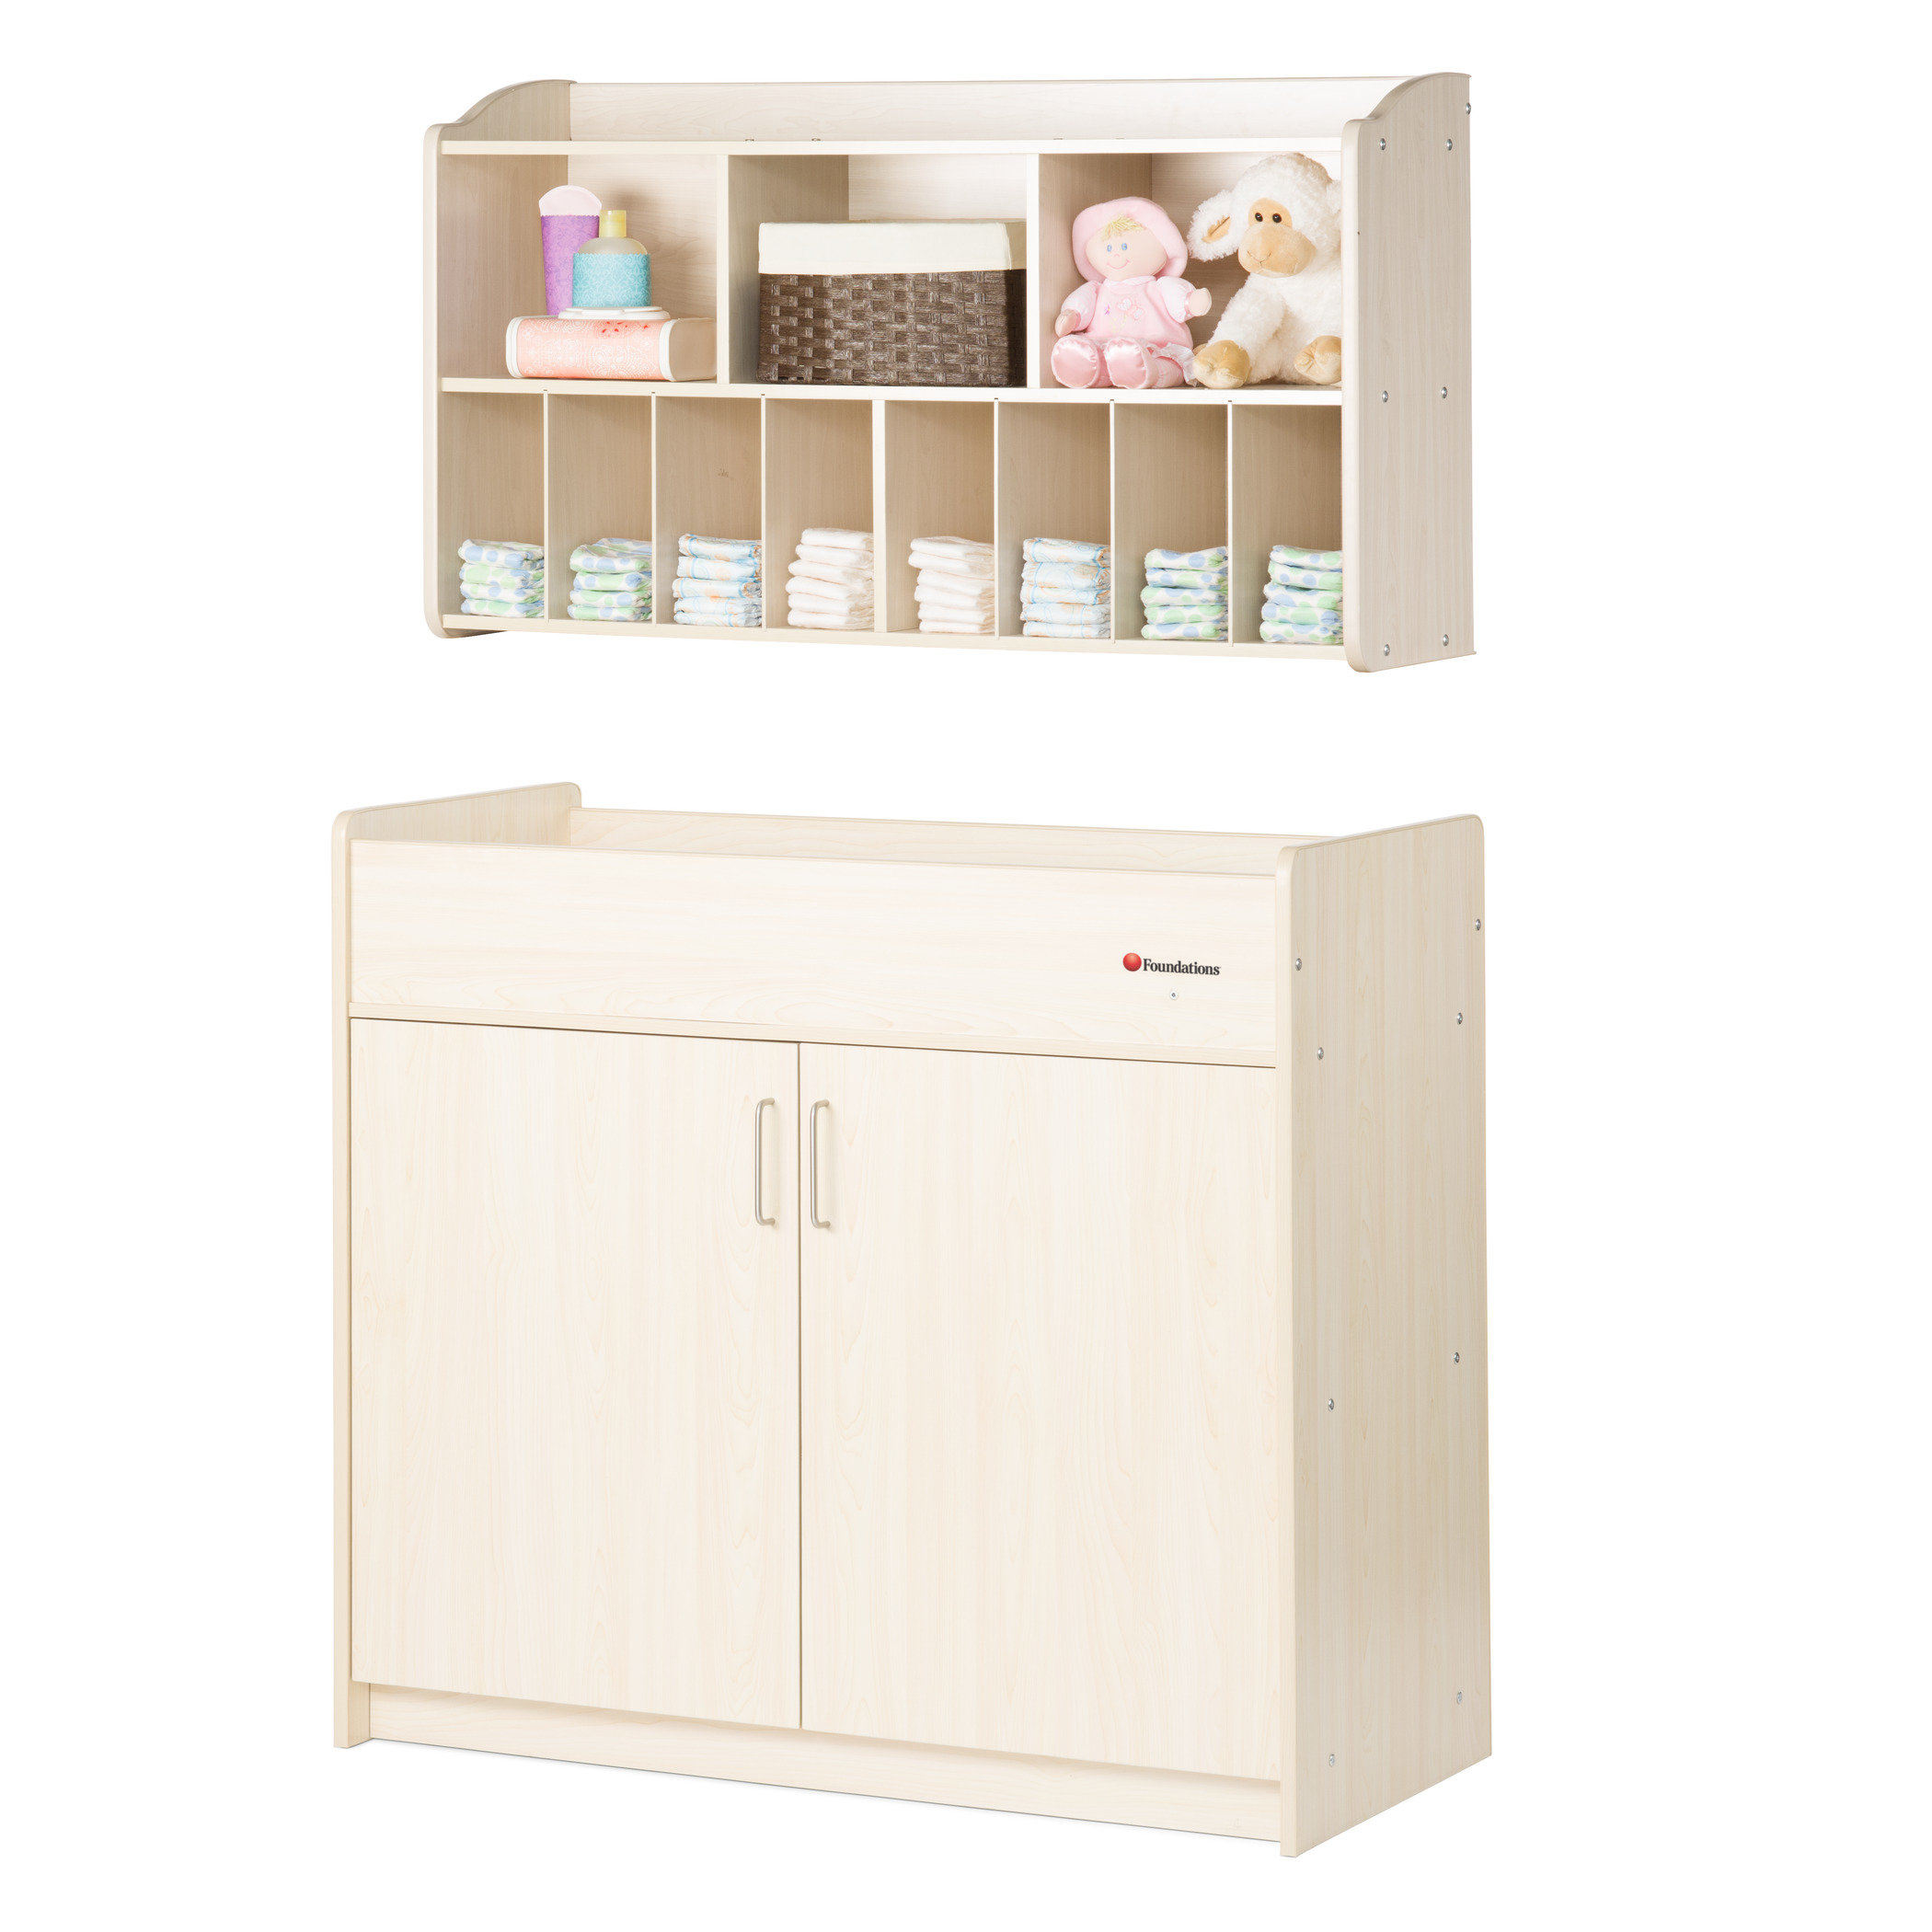 Foundations Safetycraft Changing Table Dresser With Pad Reviews